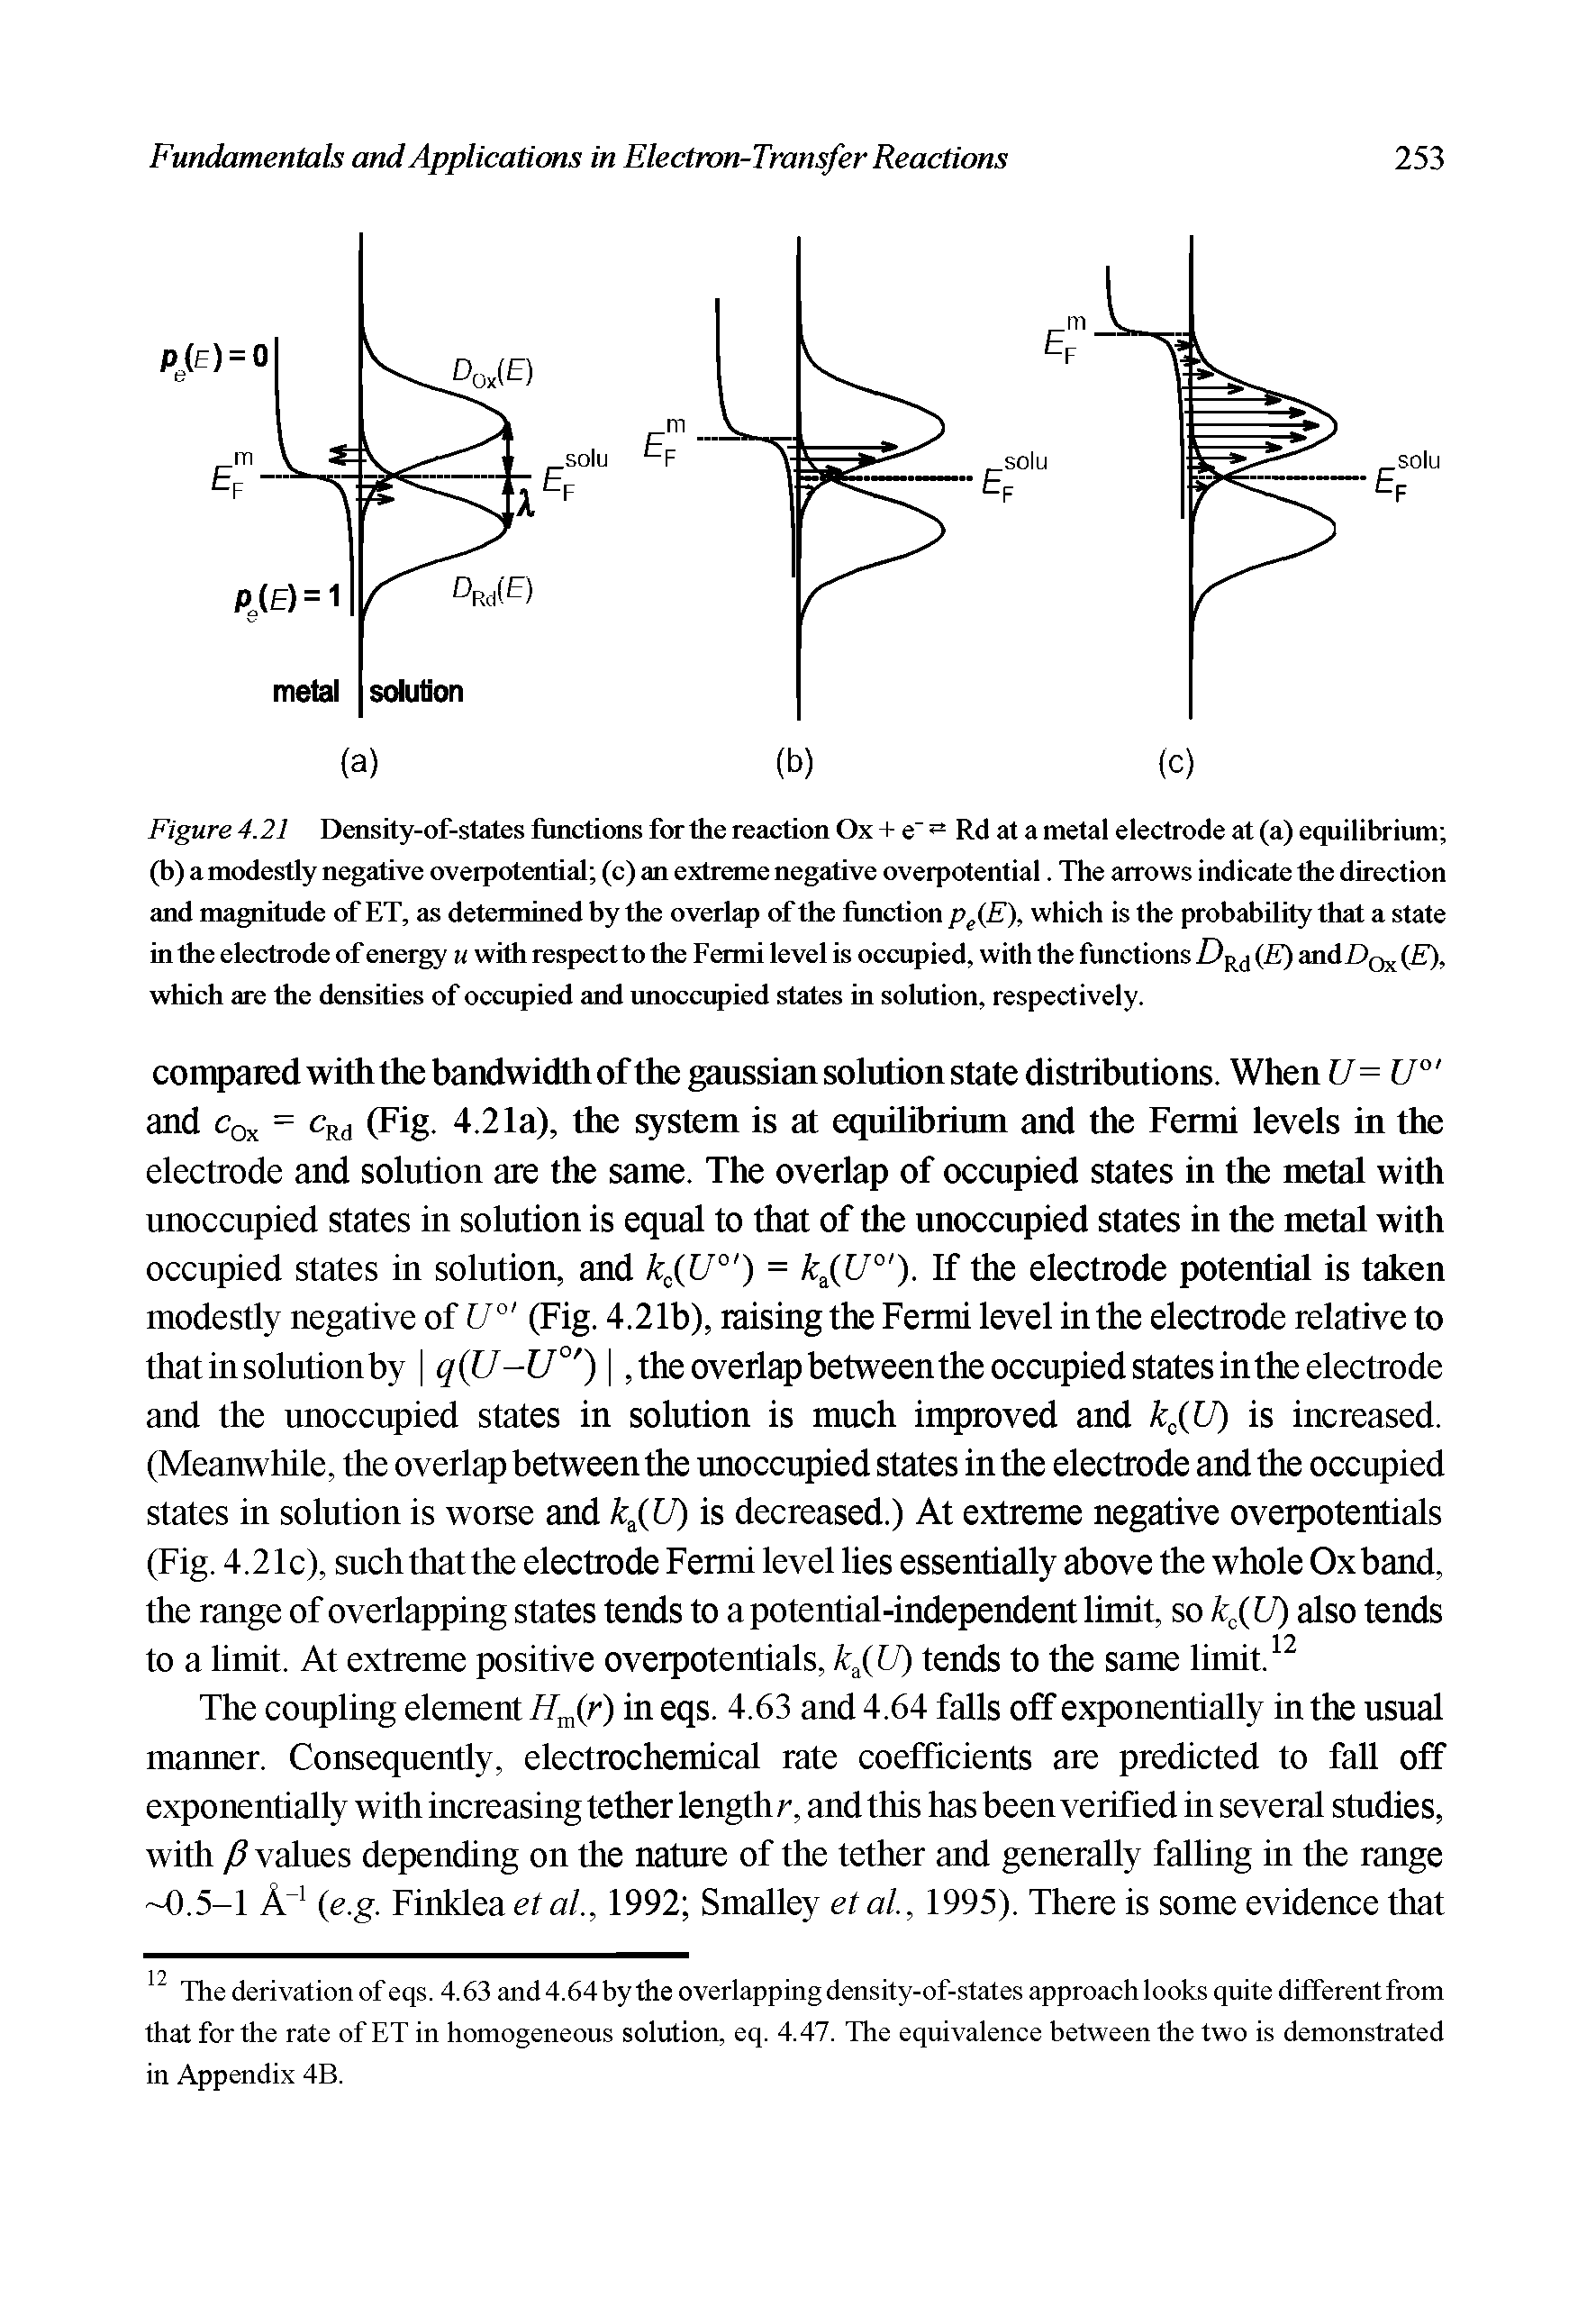 Figure 4.21 Density-of-states functions fortiie reaction Ox + e" Rd at a metal electrode at (a) equilibrium (b) a modestly negative overpotential (c) an extreme negative overpotential. The arrows indicate die direction and magnitude of ET, as determined by the overlap of the function p E which is the probability that a state in die elecd ode of energy u widi respect to die Fermi level is occupied, with the functions (E) andDo ( ),...